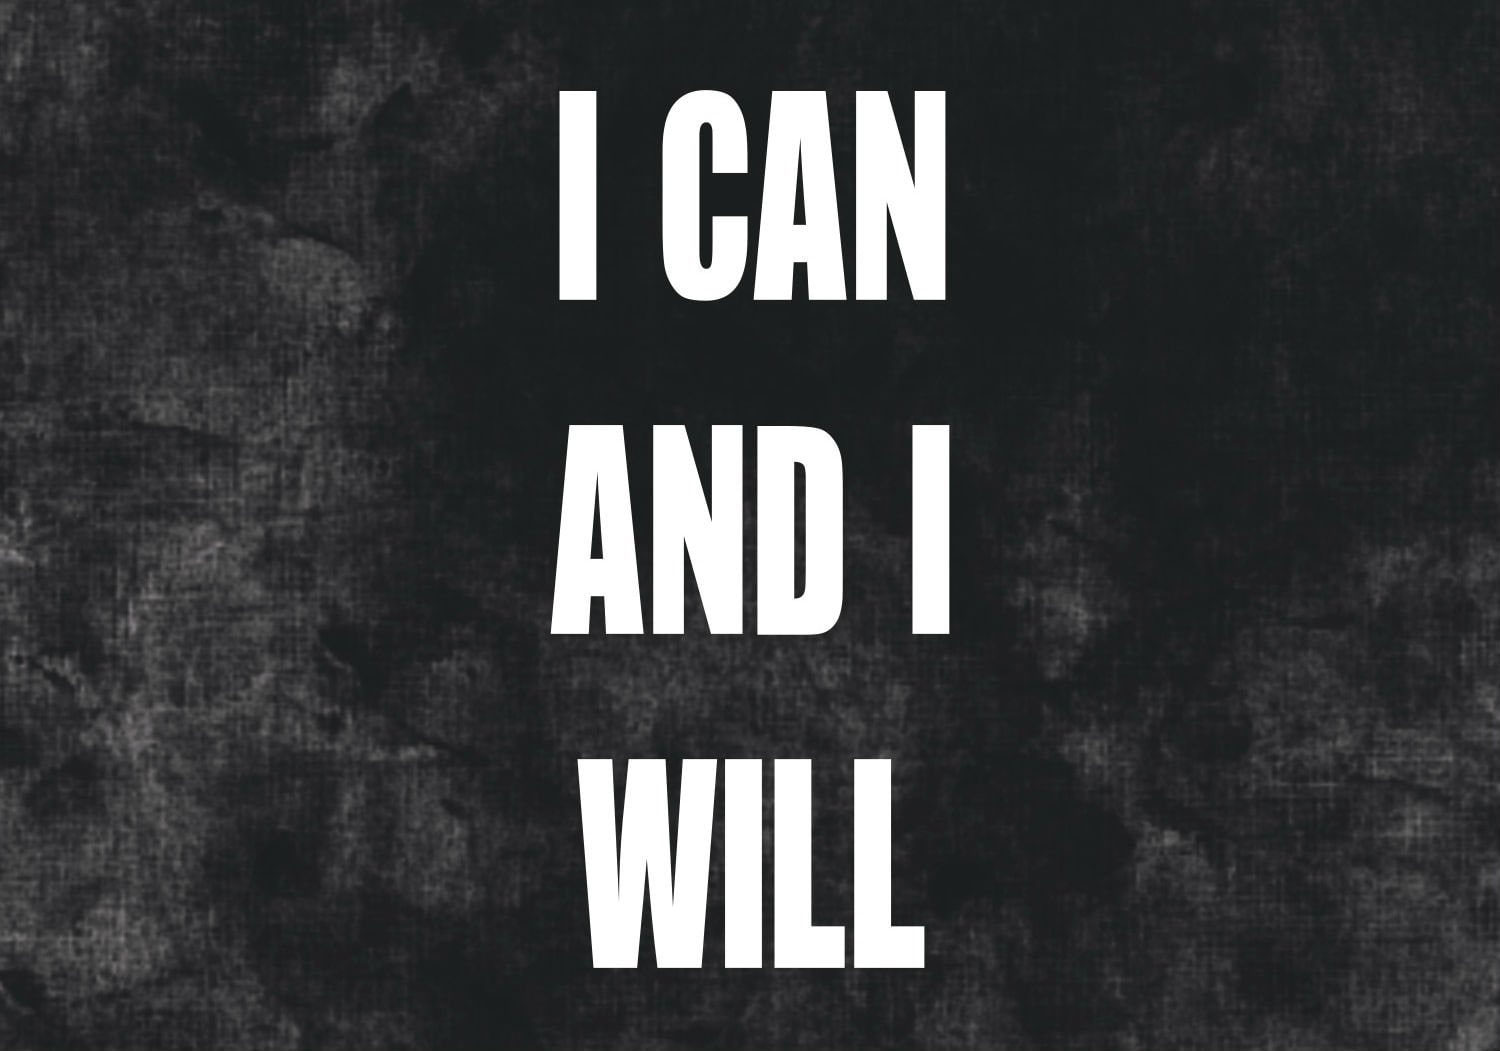 I can and i will wallpaper, inspirational, motivational, quote